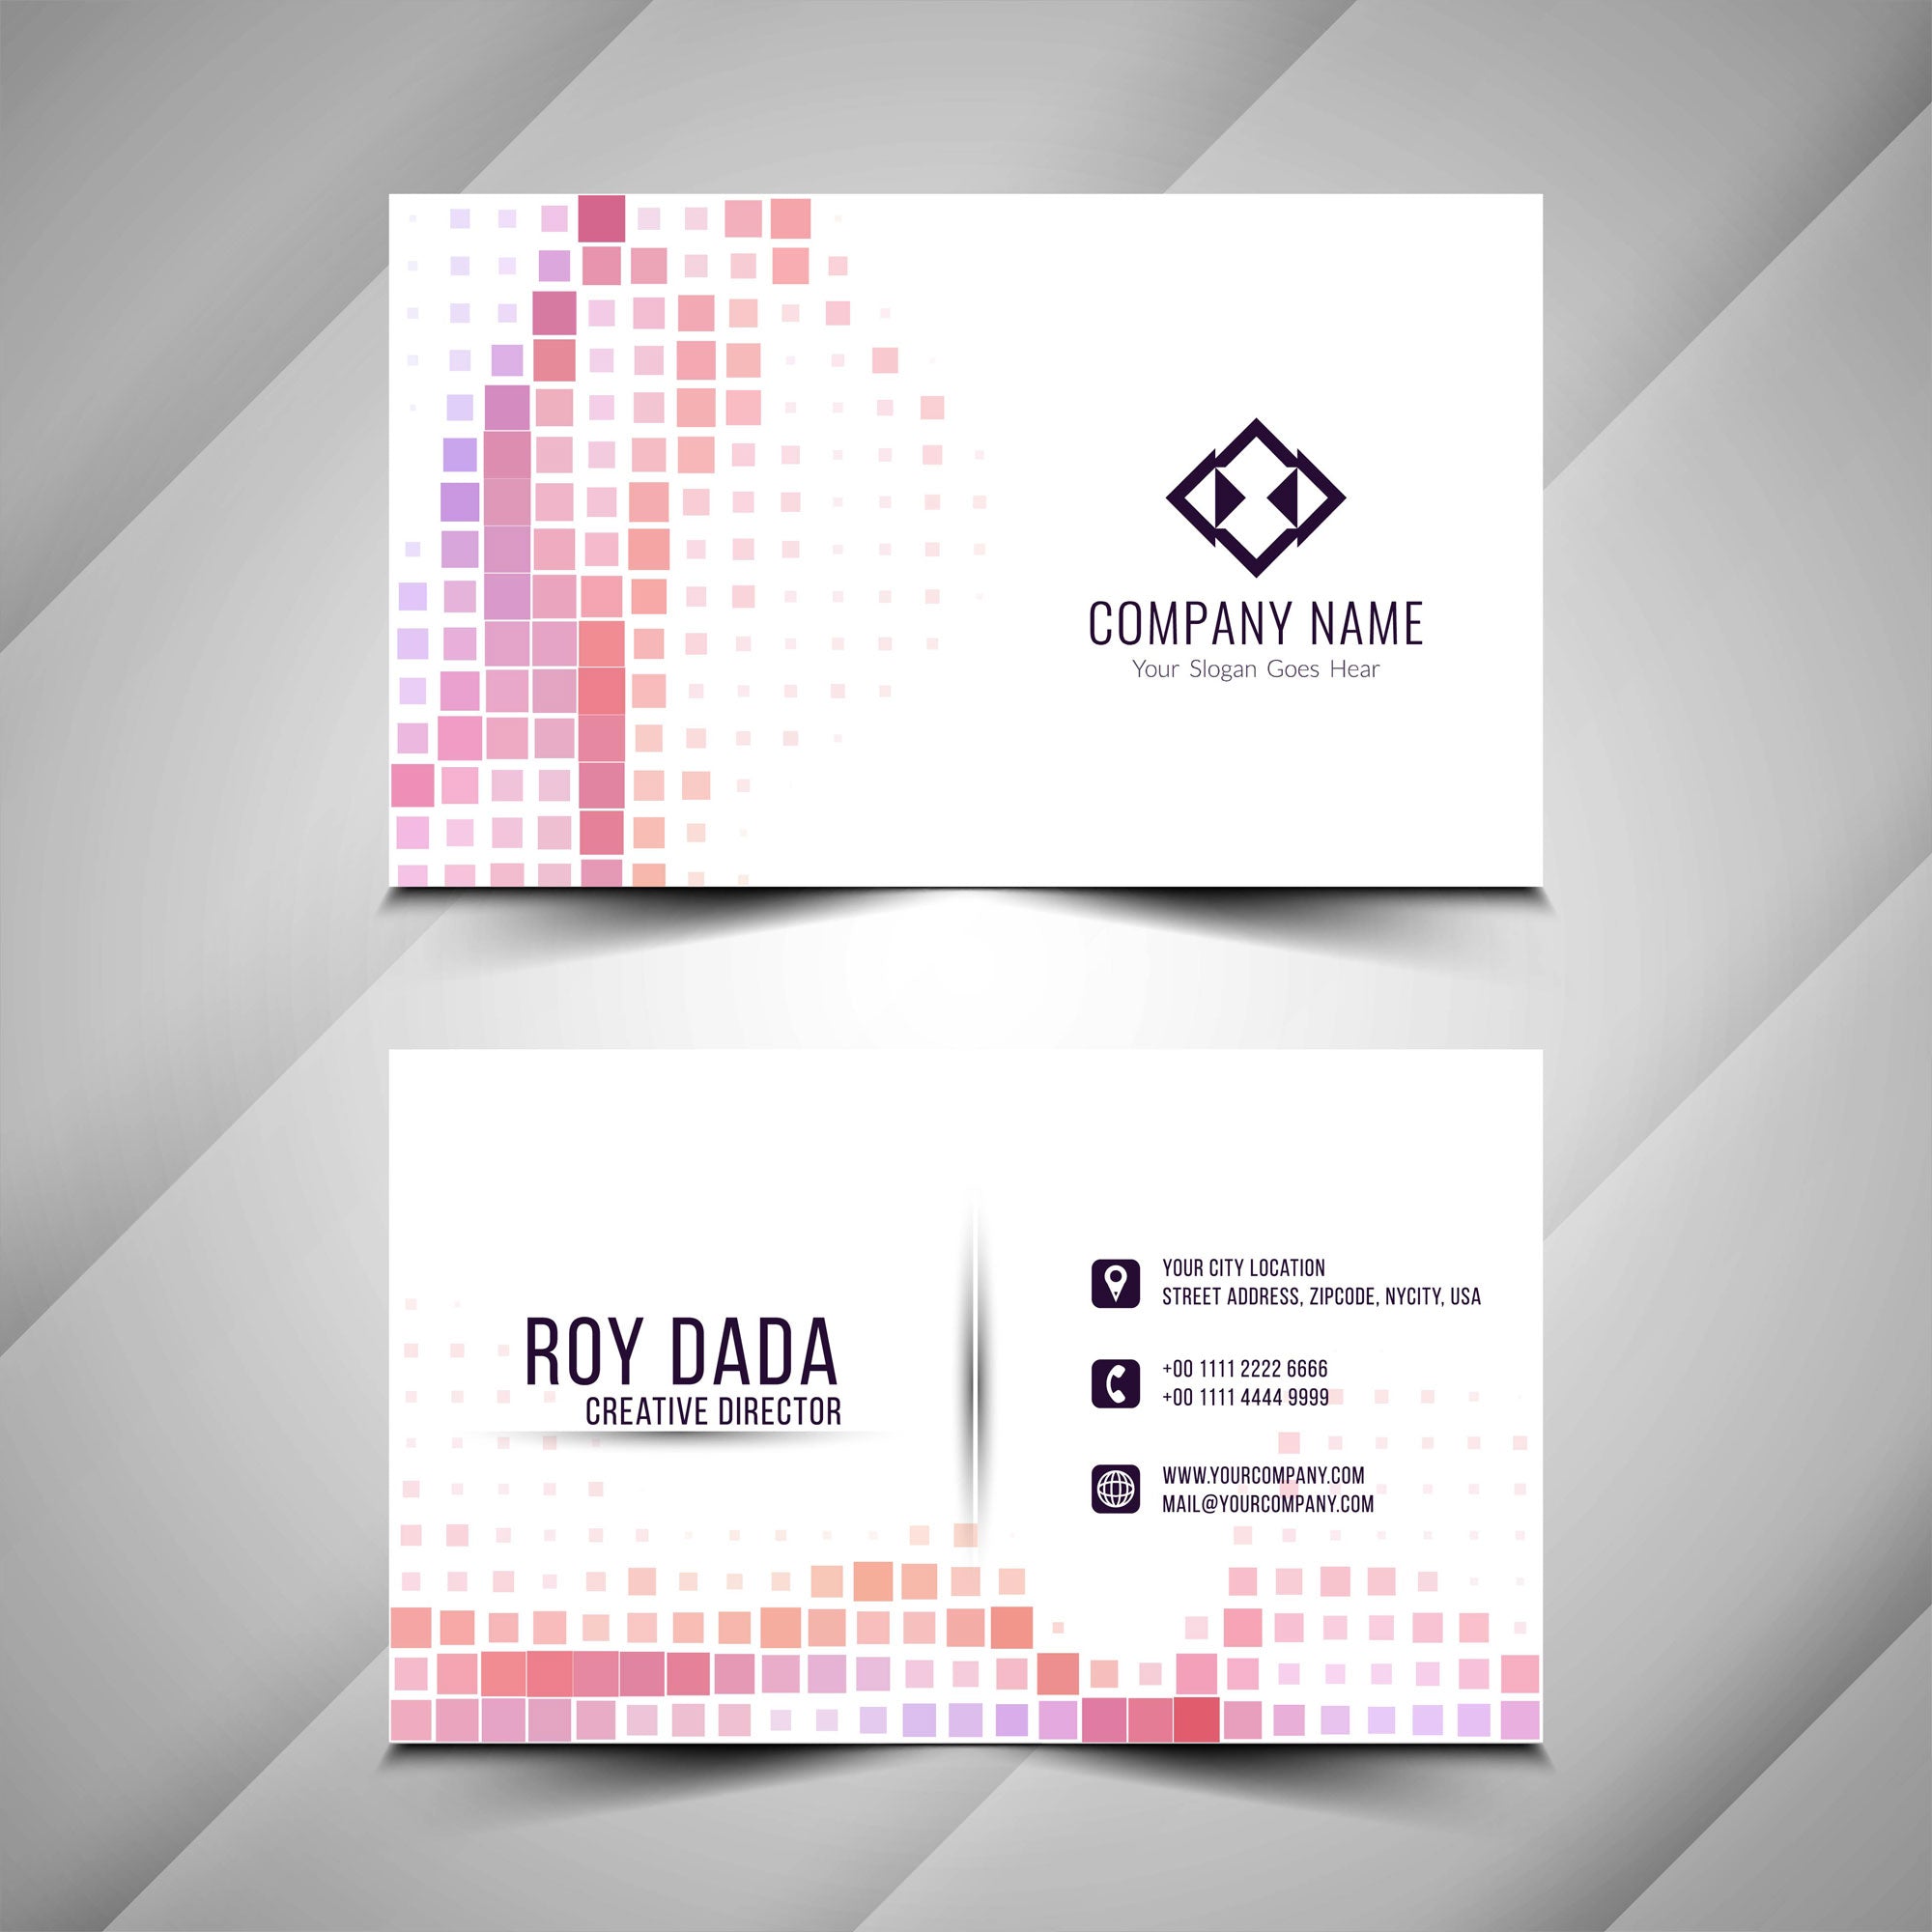 Plantable Modern Abstract Business Cards - 250 Cards